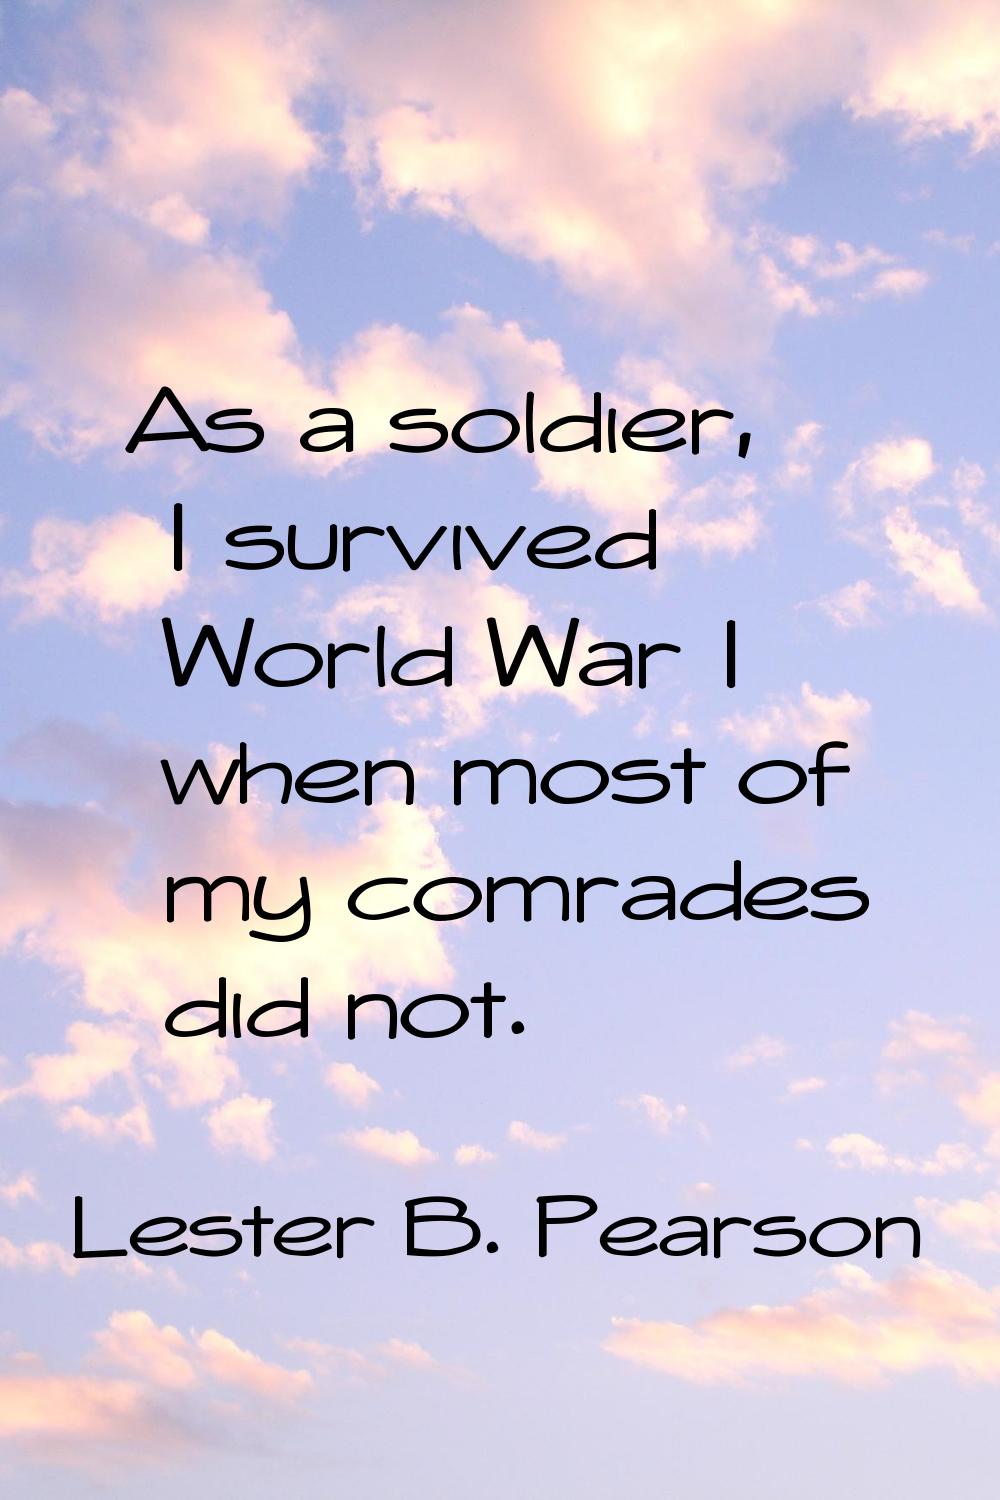 As a soldier, I survived World War I when most of my comrades did not.